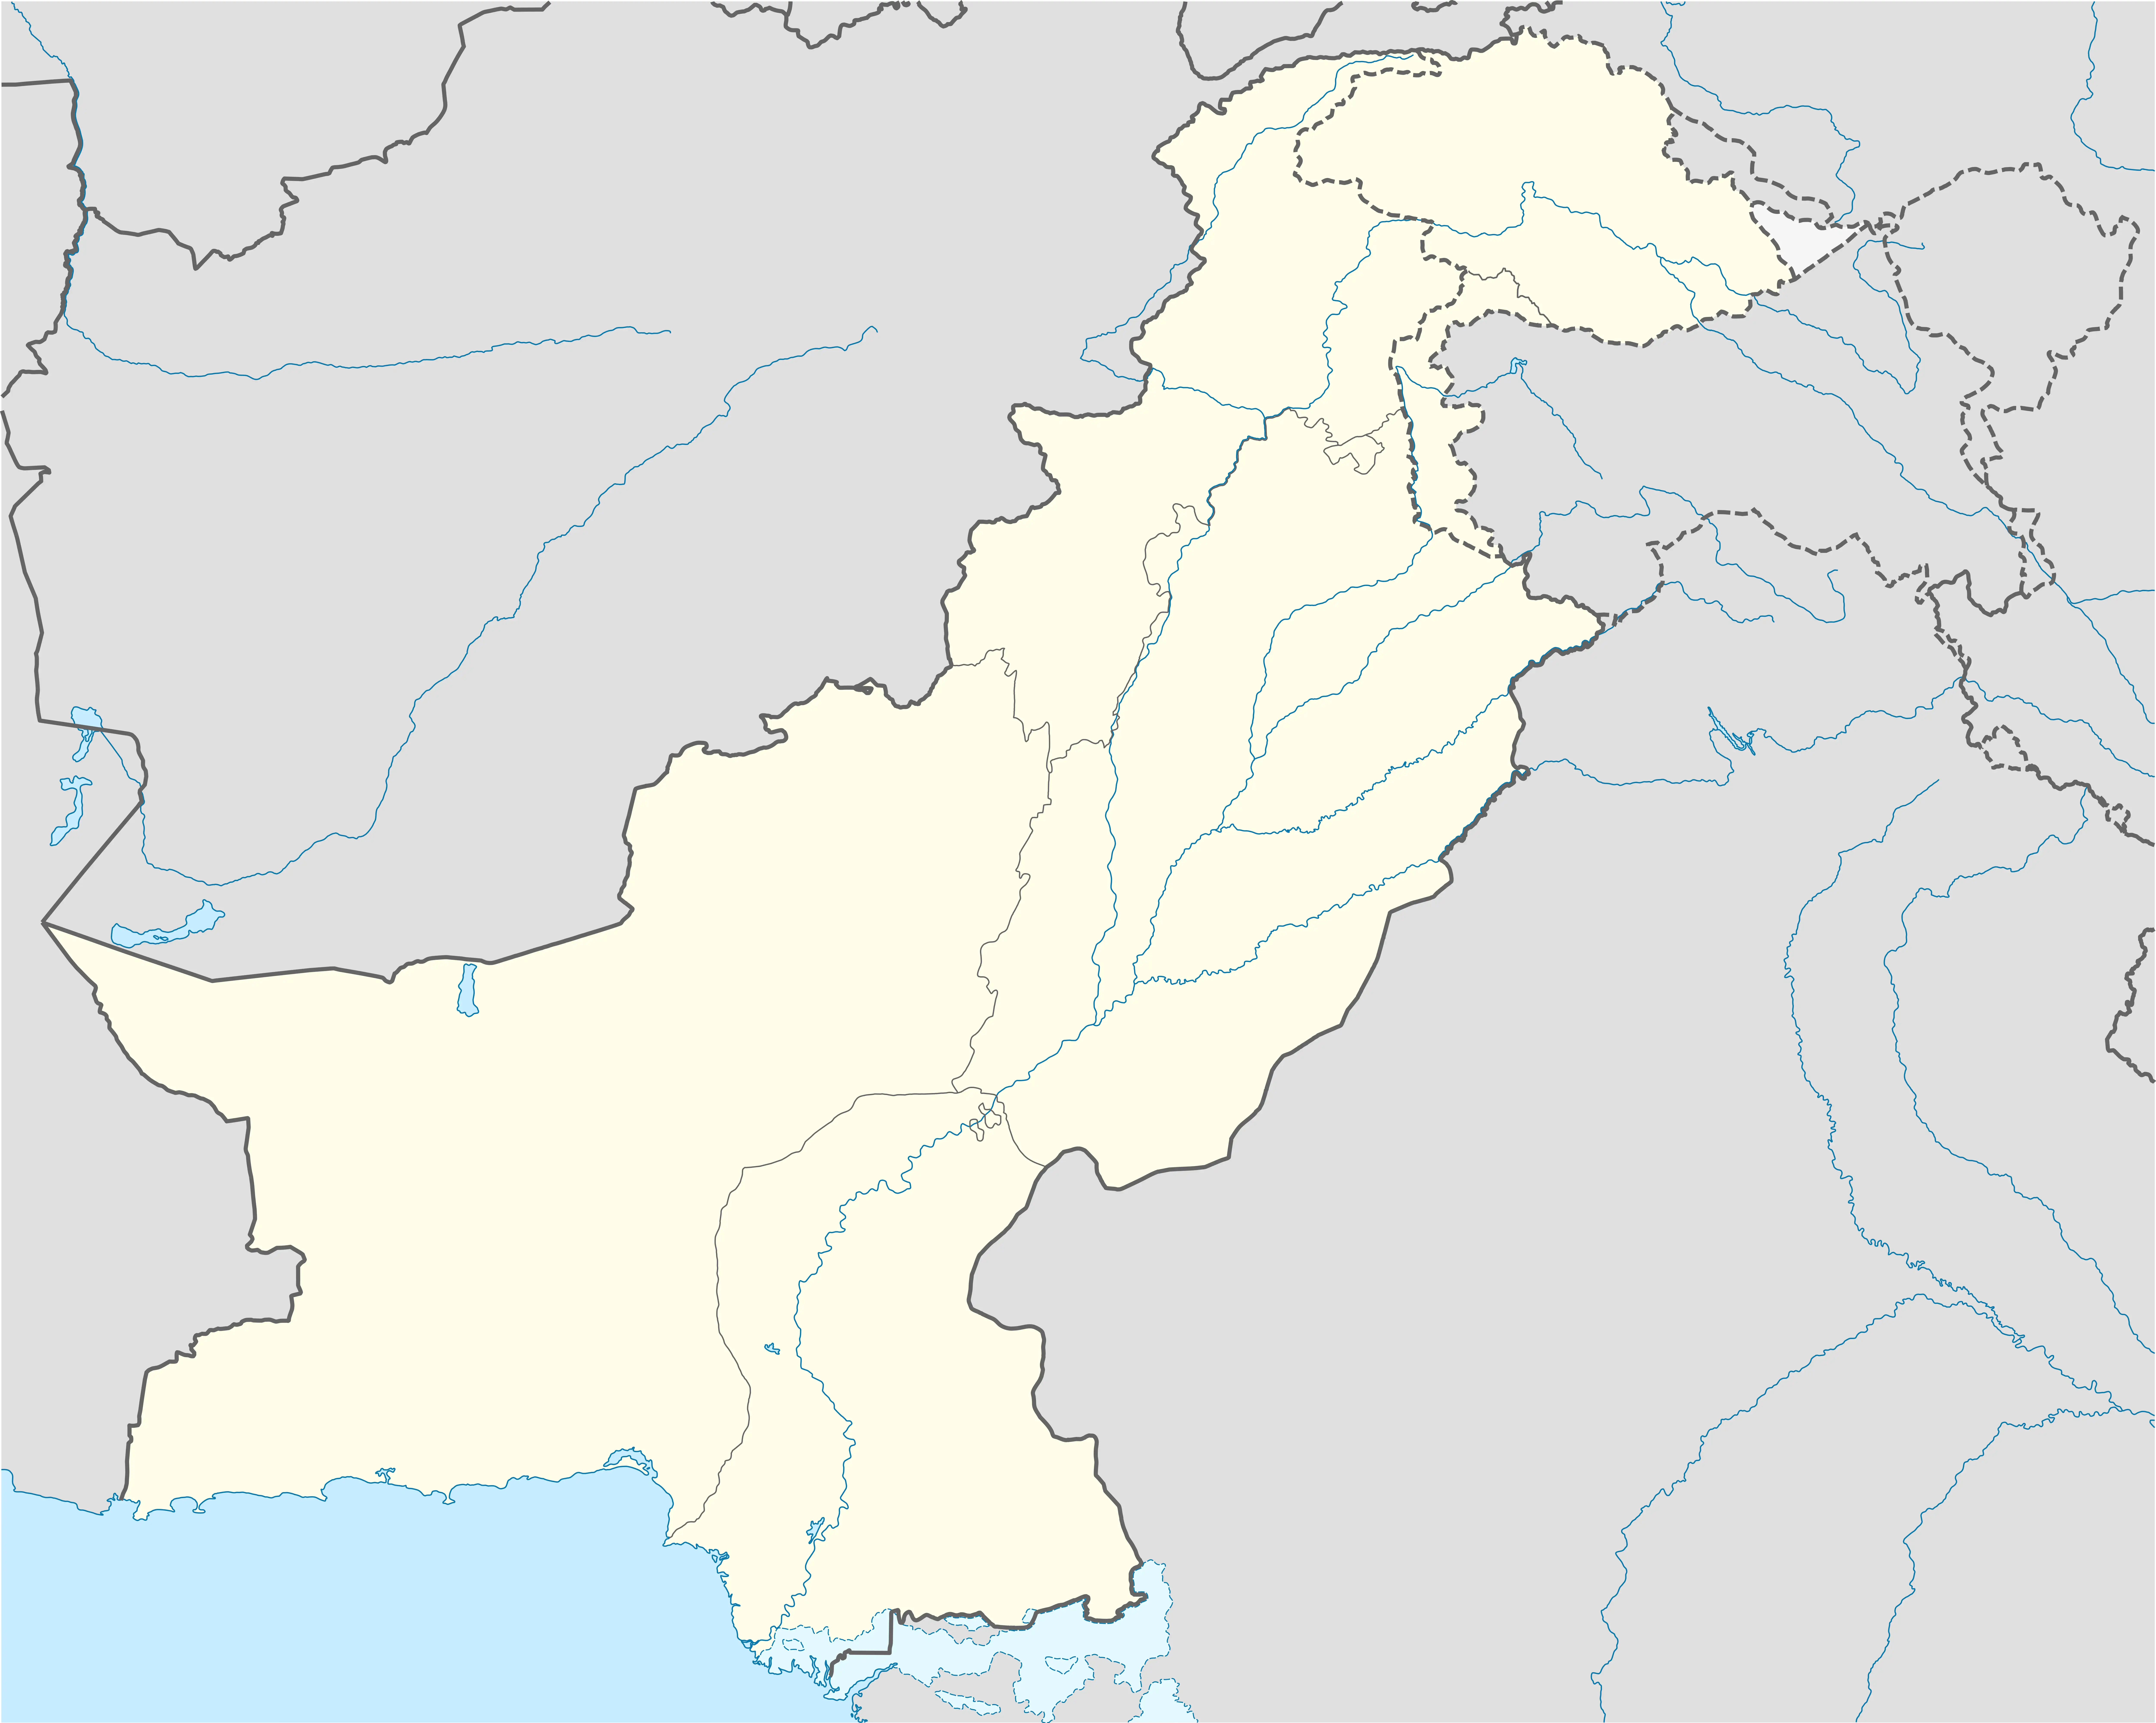 Nowshera is located in Pakistan